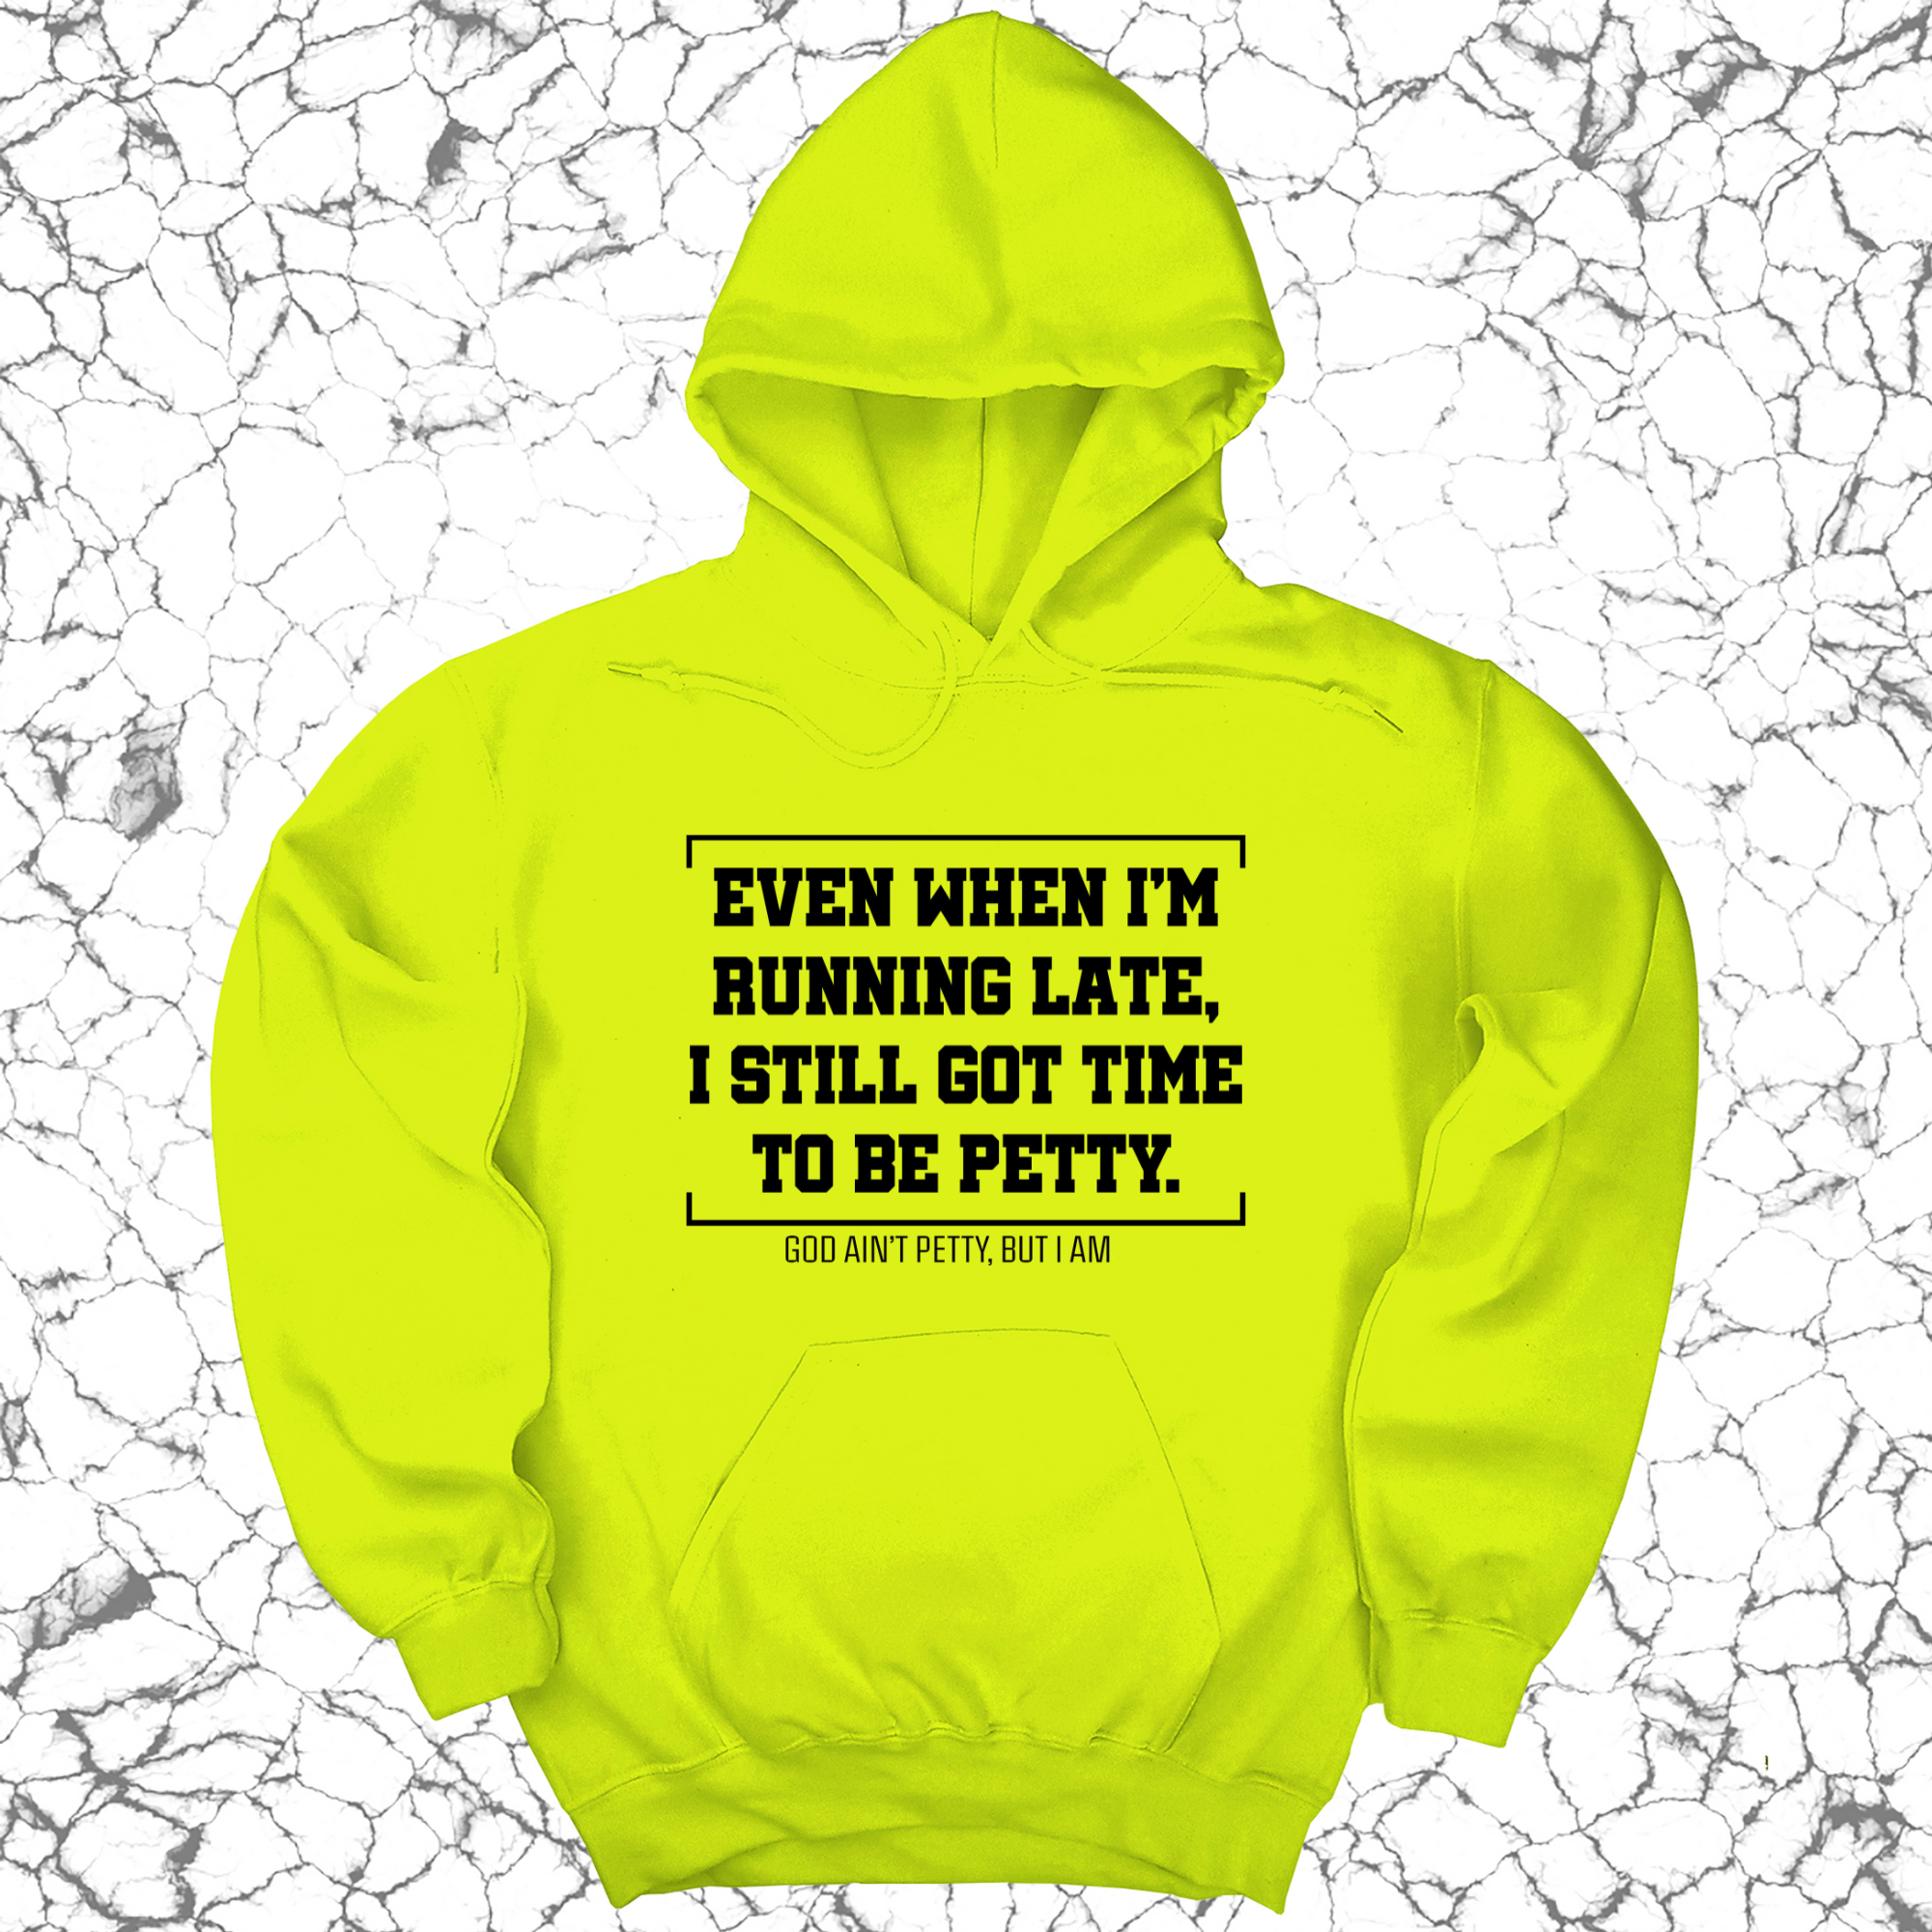 Even when I'm running late, I still got time to be petty Unisex Hoodie-Hoodie-The Original God Ain't Petty But I Am